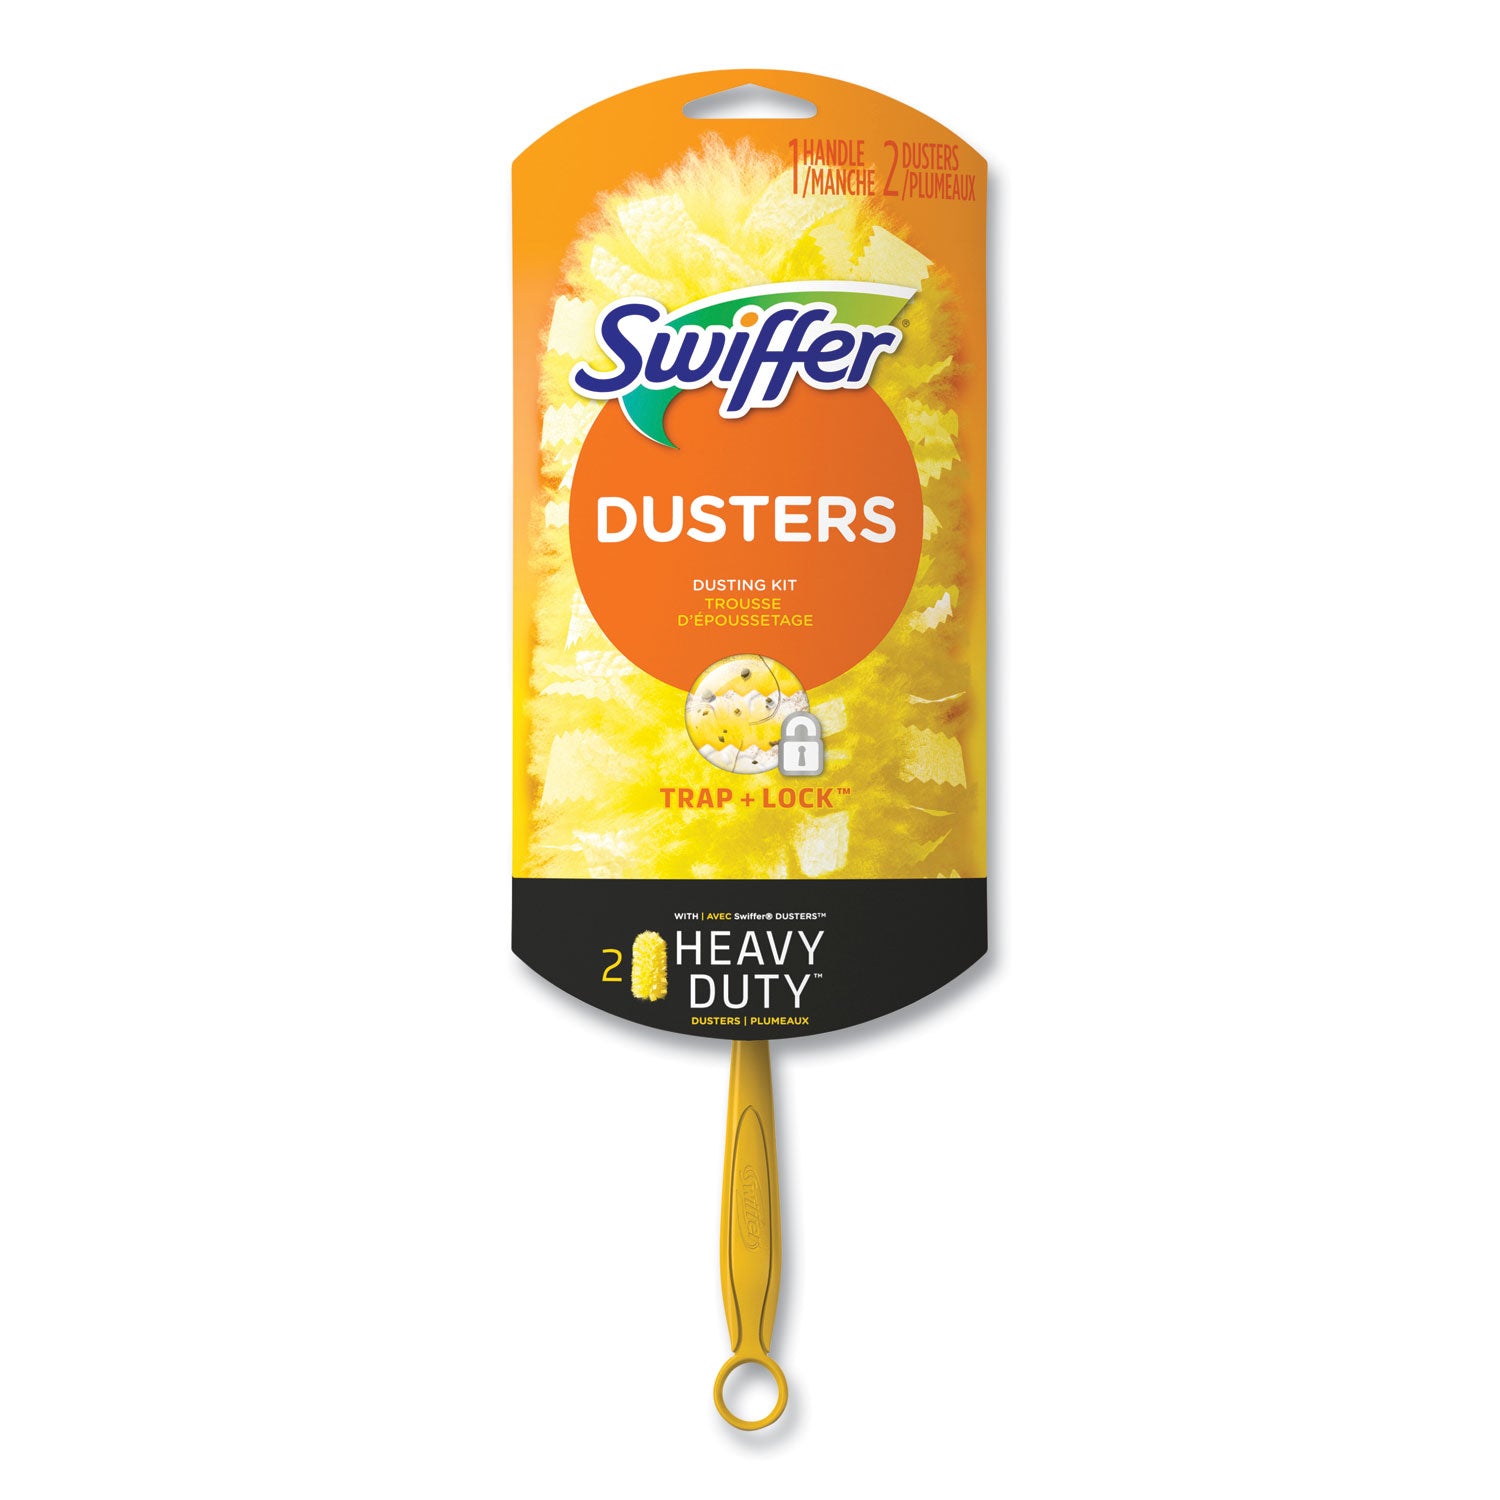 heavy-duty-dusters-starter-kit-6-handle-with-two-disposable-dusters-4-kits-carton_pgc08109 - 1